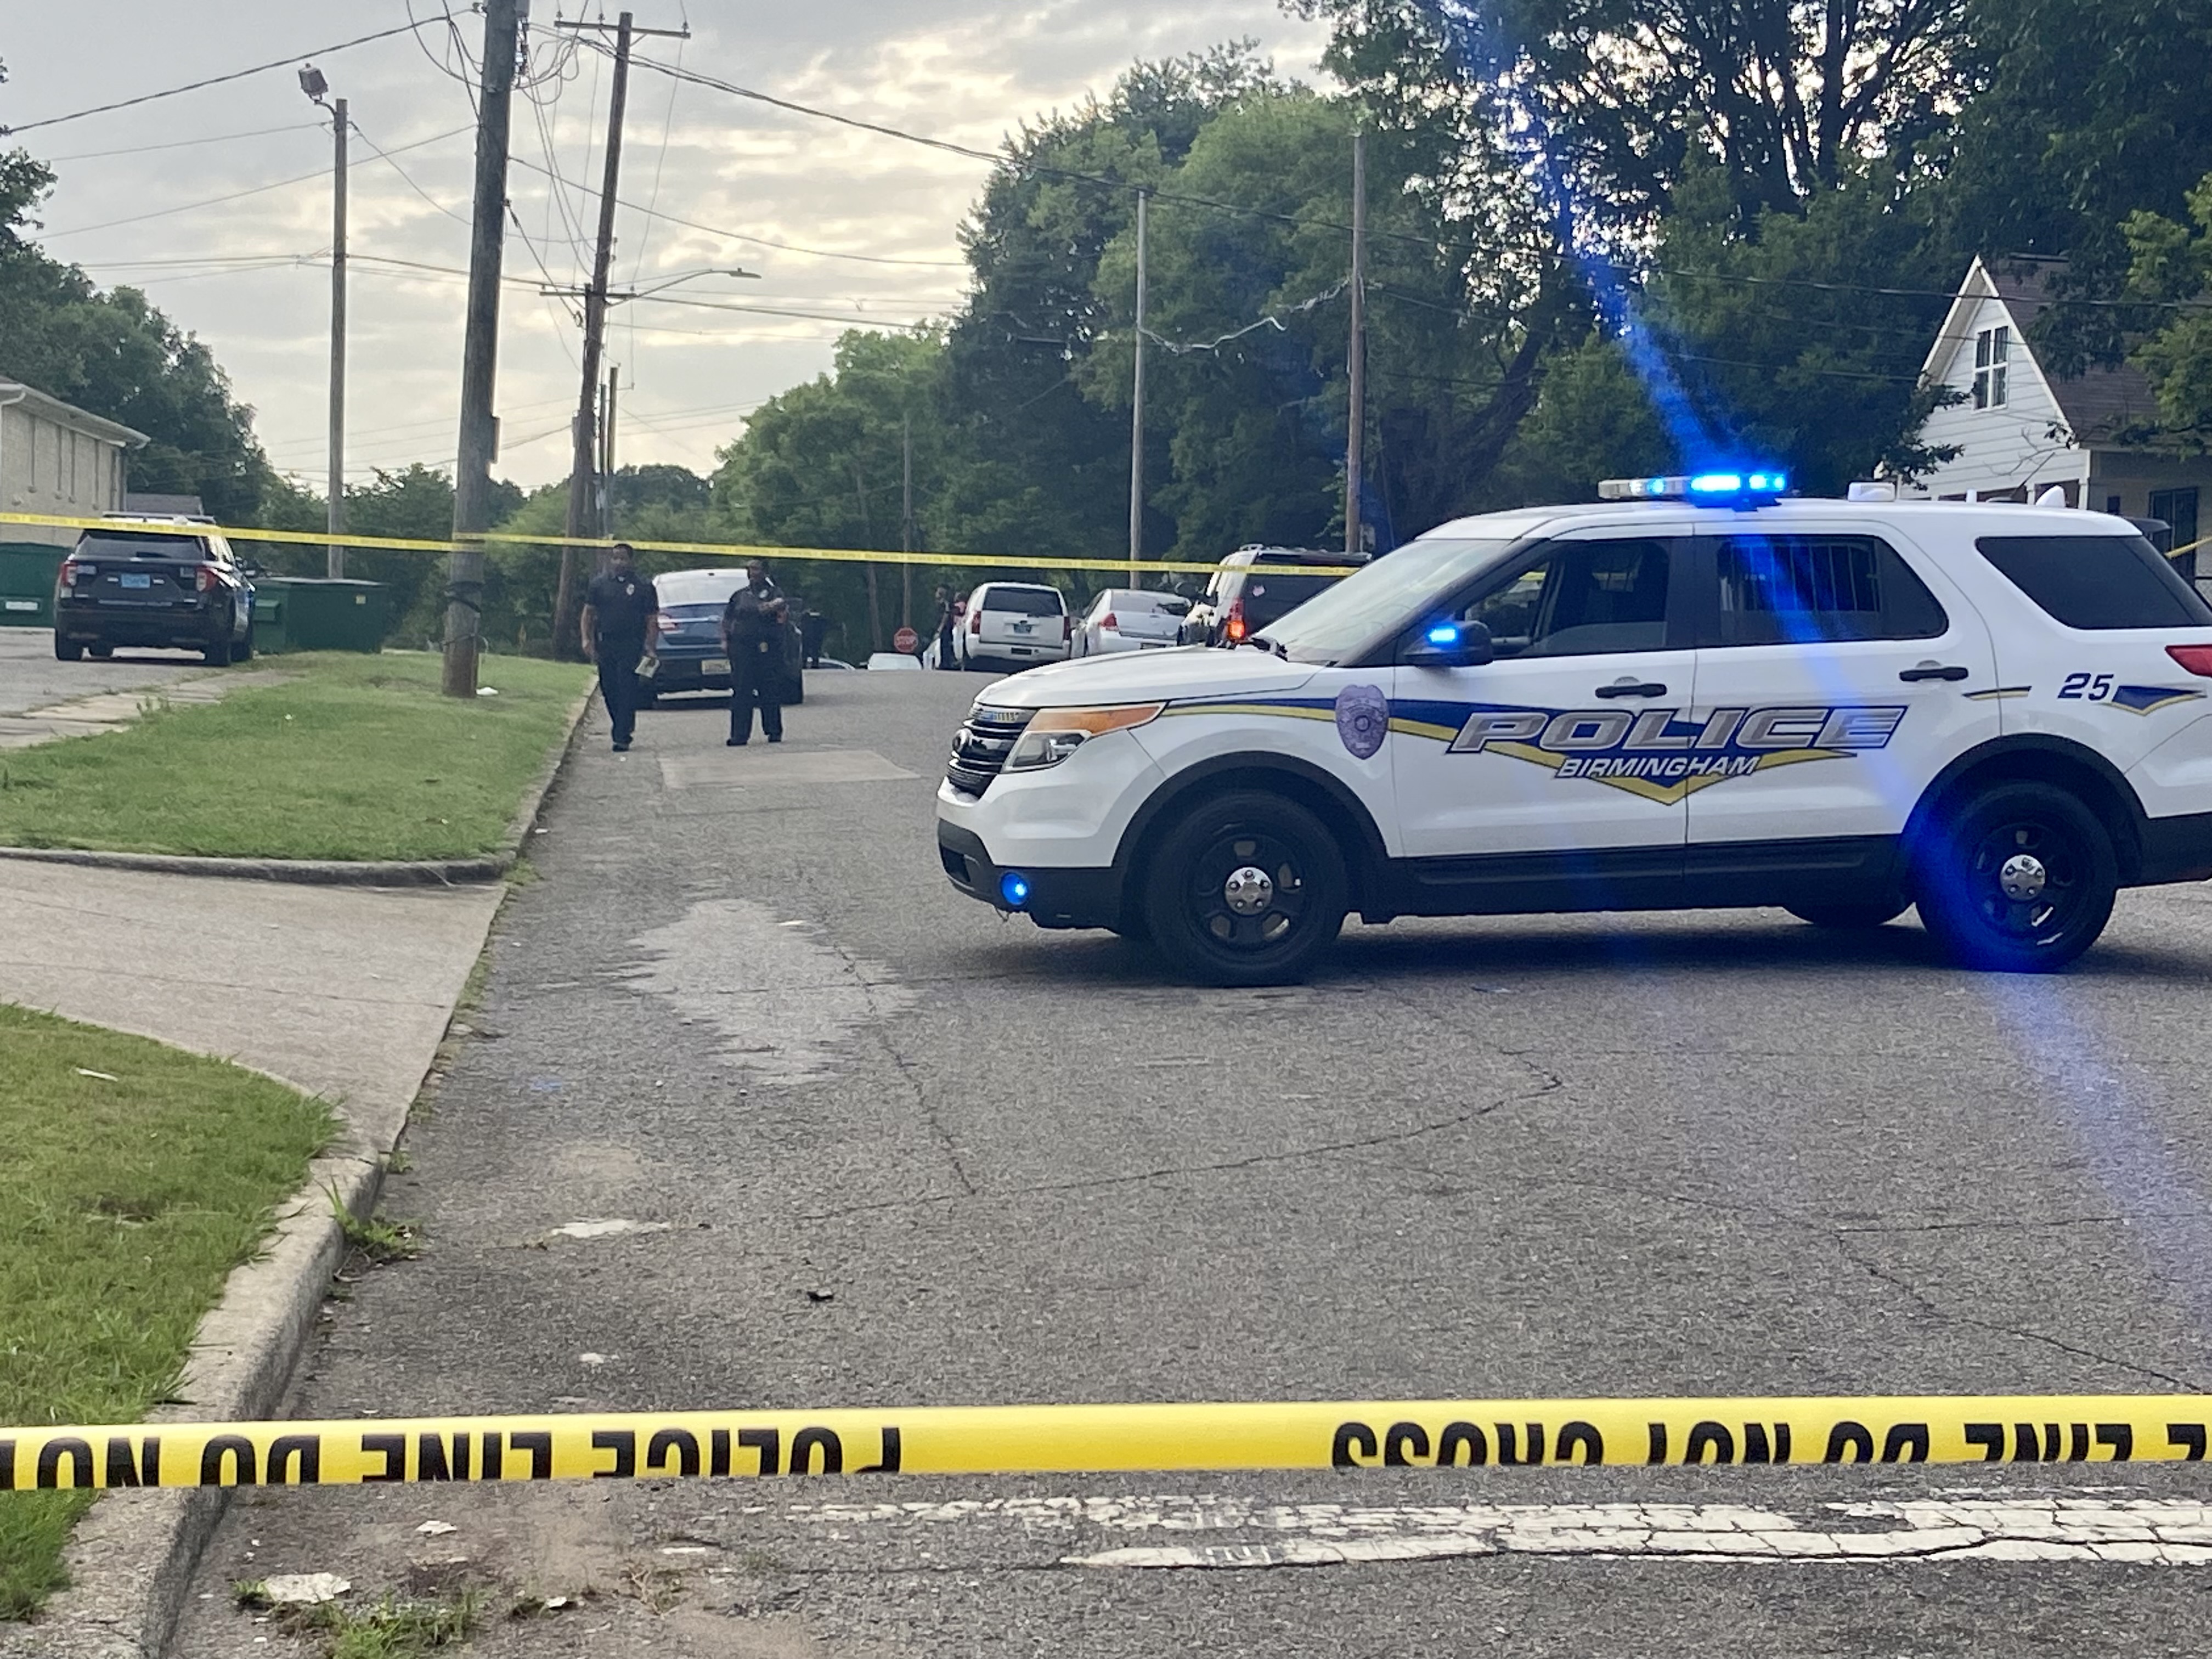 One man dead, another detained after shooting in east Birmingham neighborhood